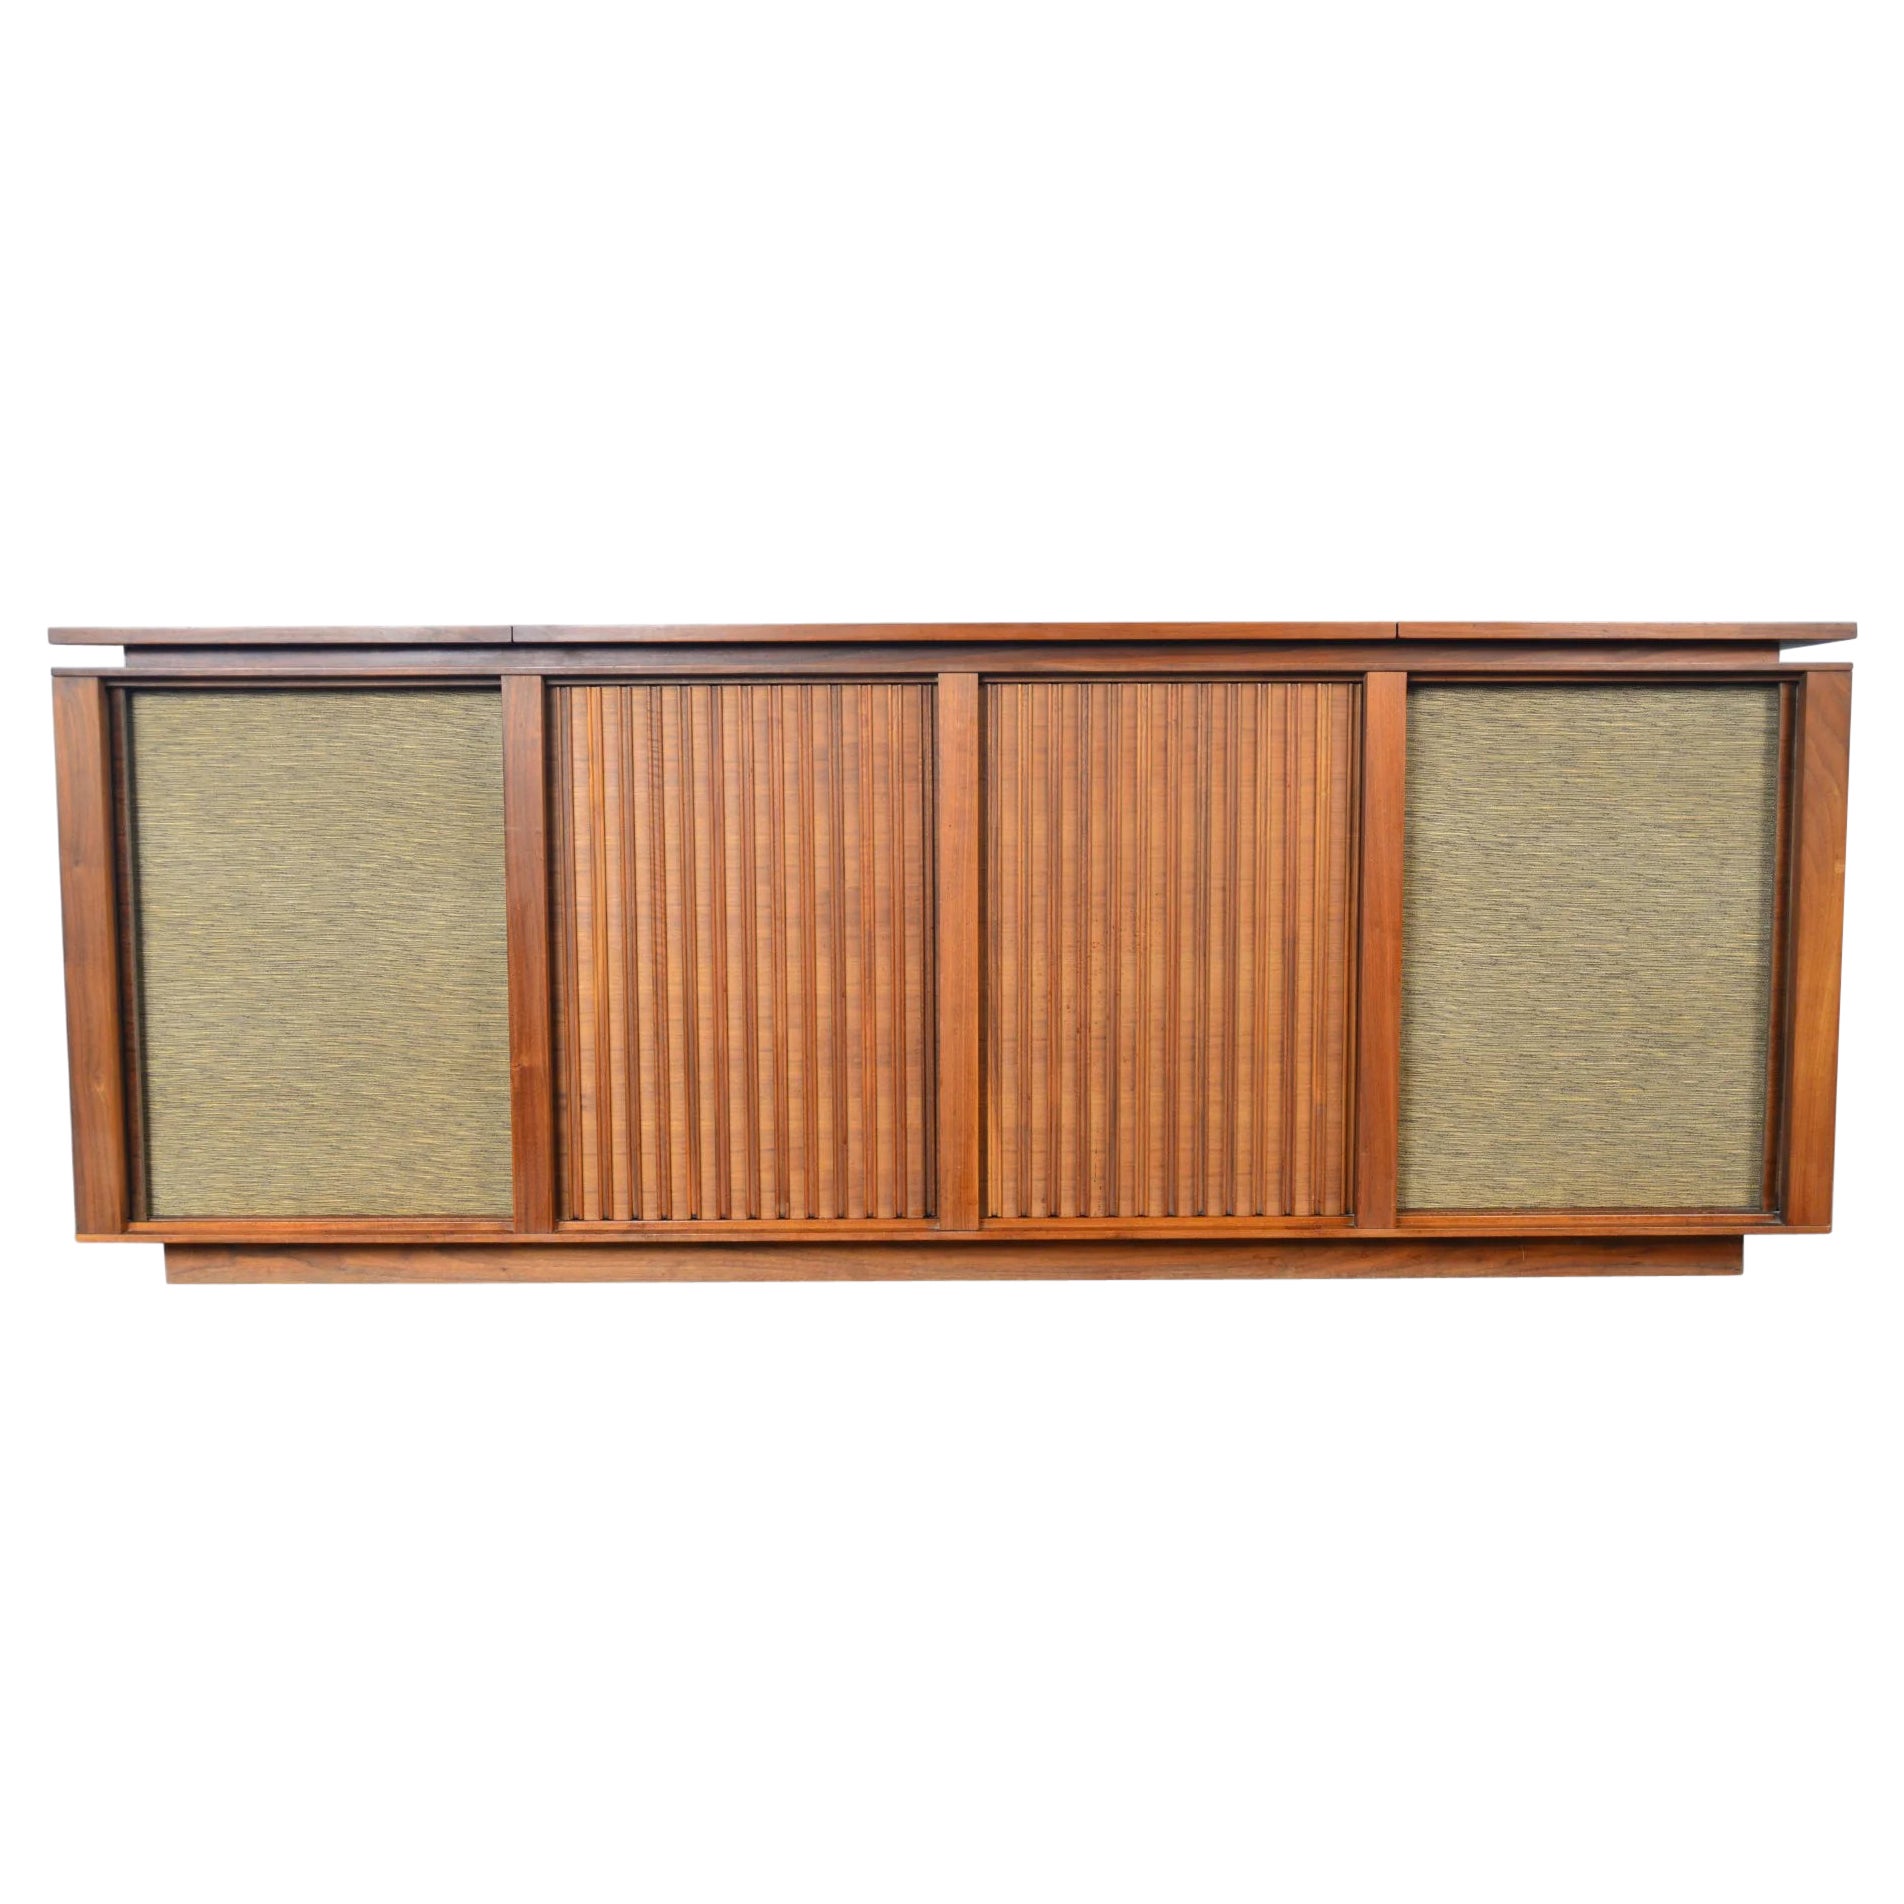 1960s Barzilay Walnut Tambour Stereo Console For Sale